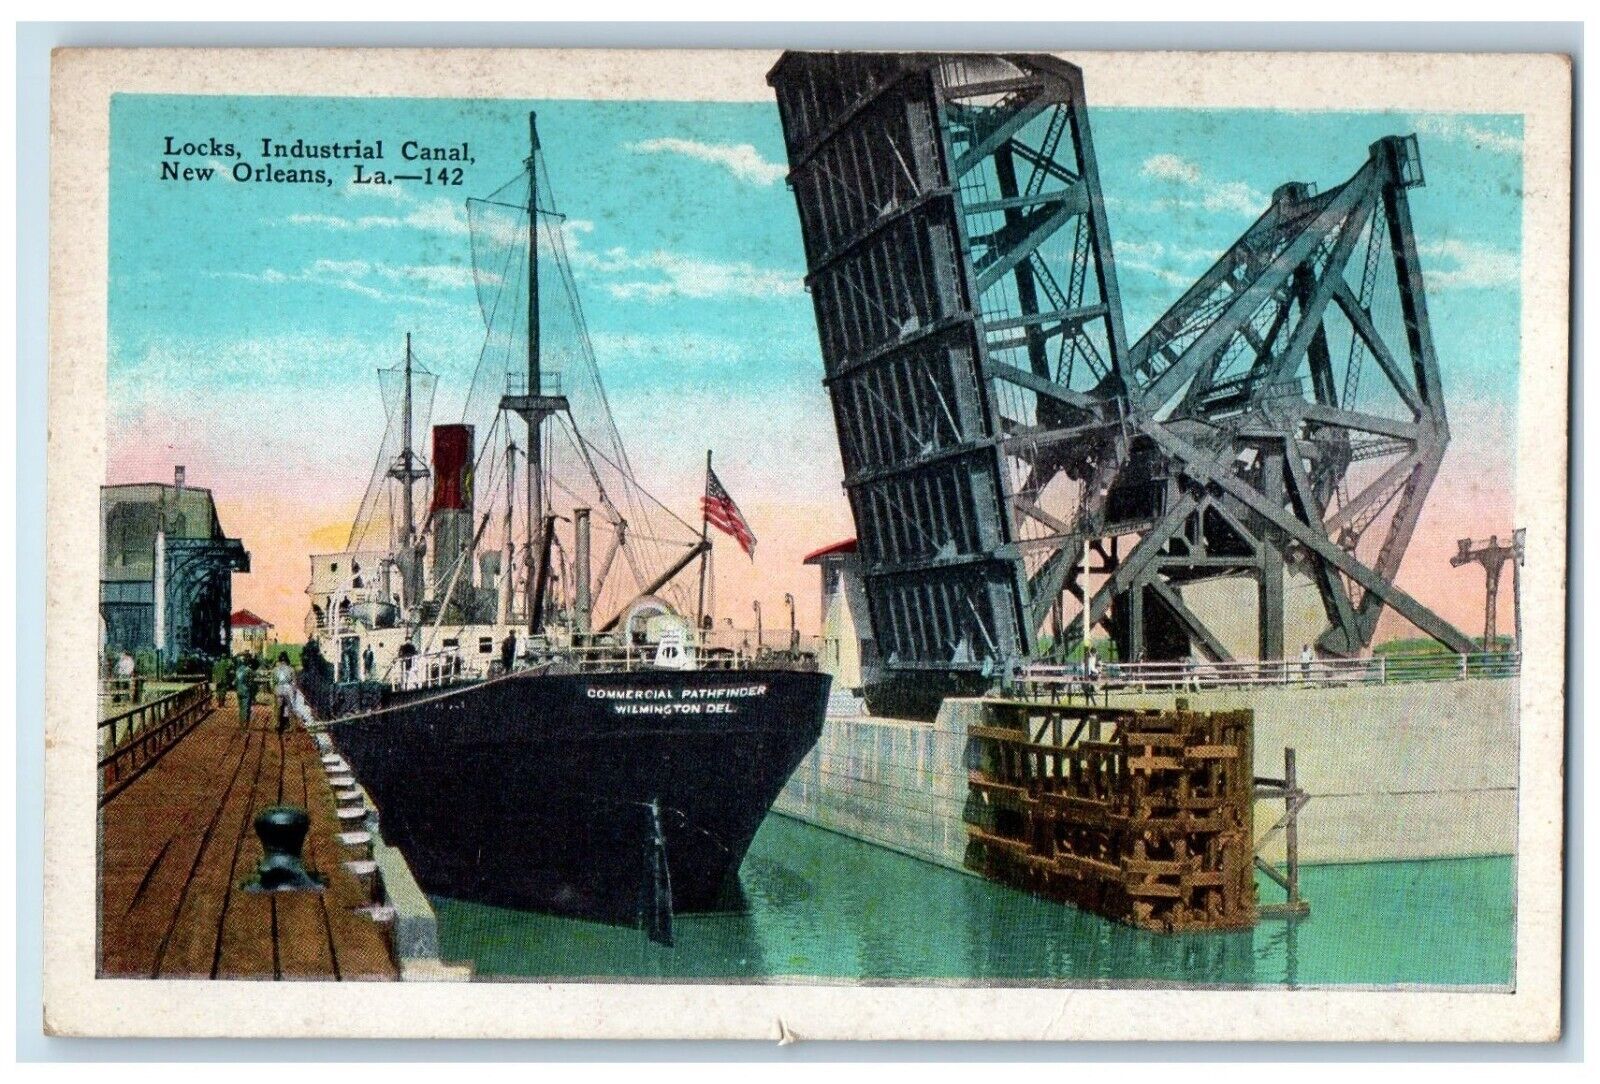 c1910's Locks Industrial Canal Commercial Pathfinder New Orleans LA Postcard